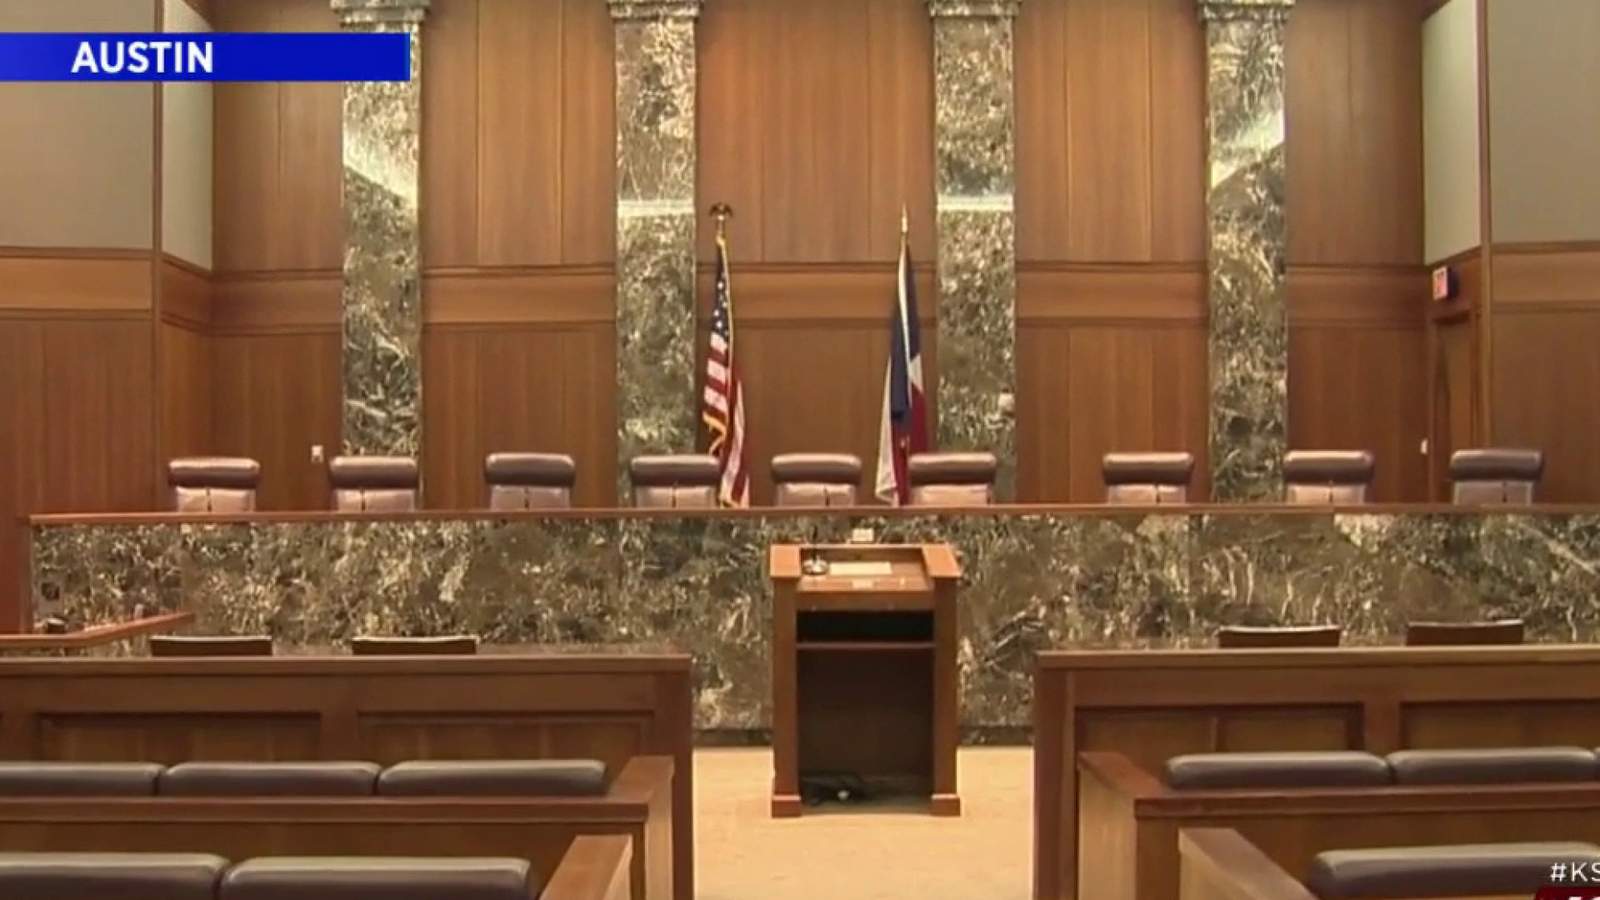 Texas appeals court makes history with remote oral arguments